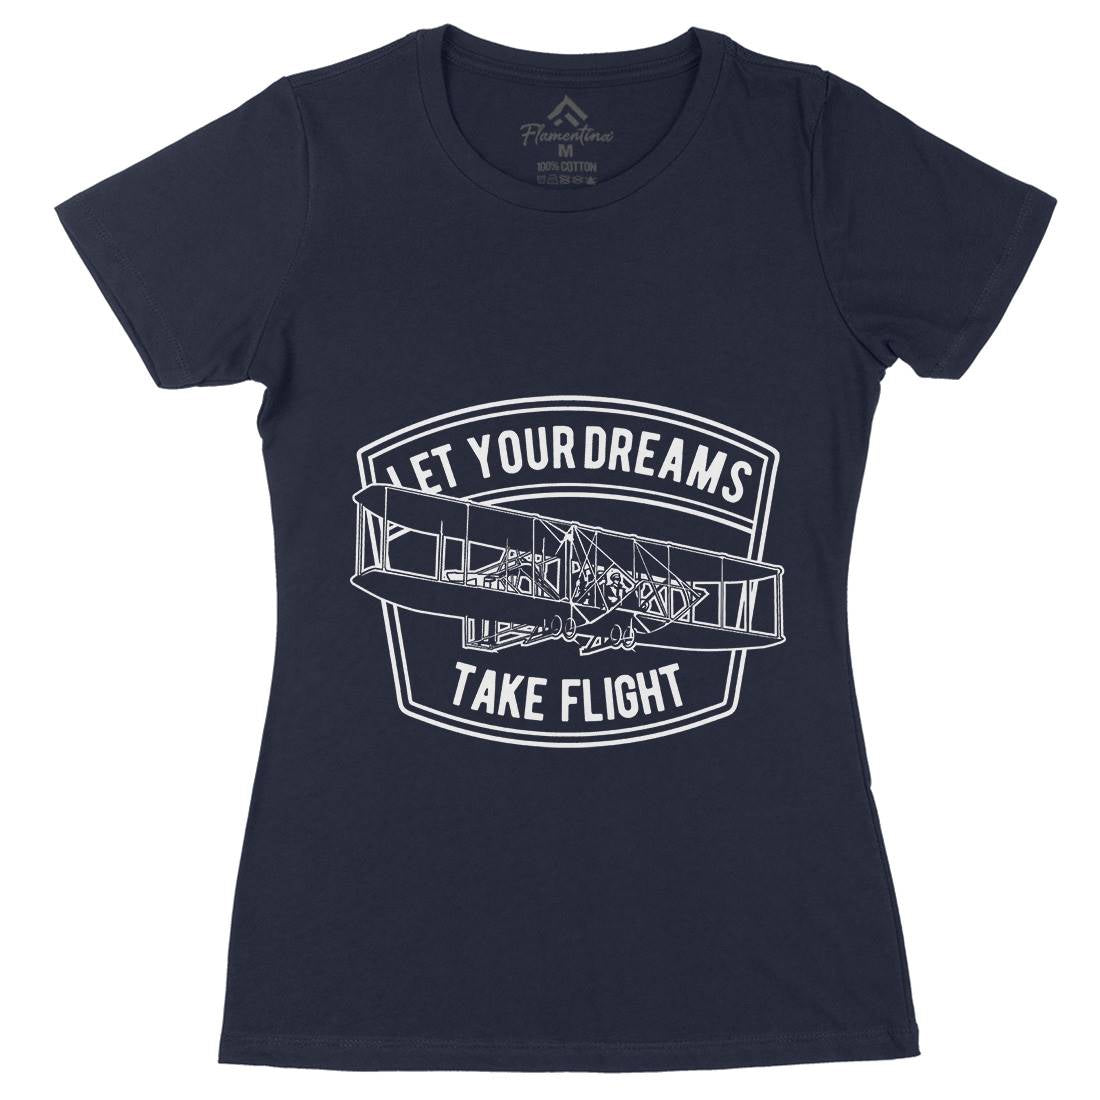 Let Your Dreams Womens Organic Crew Neck T-Shirt Vehicles A706